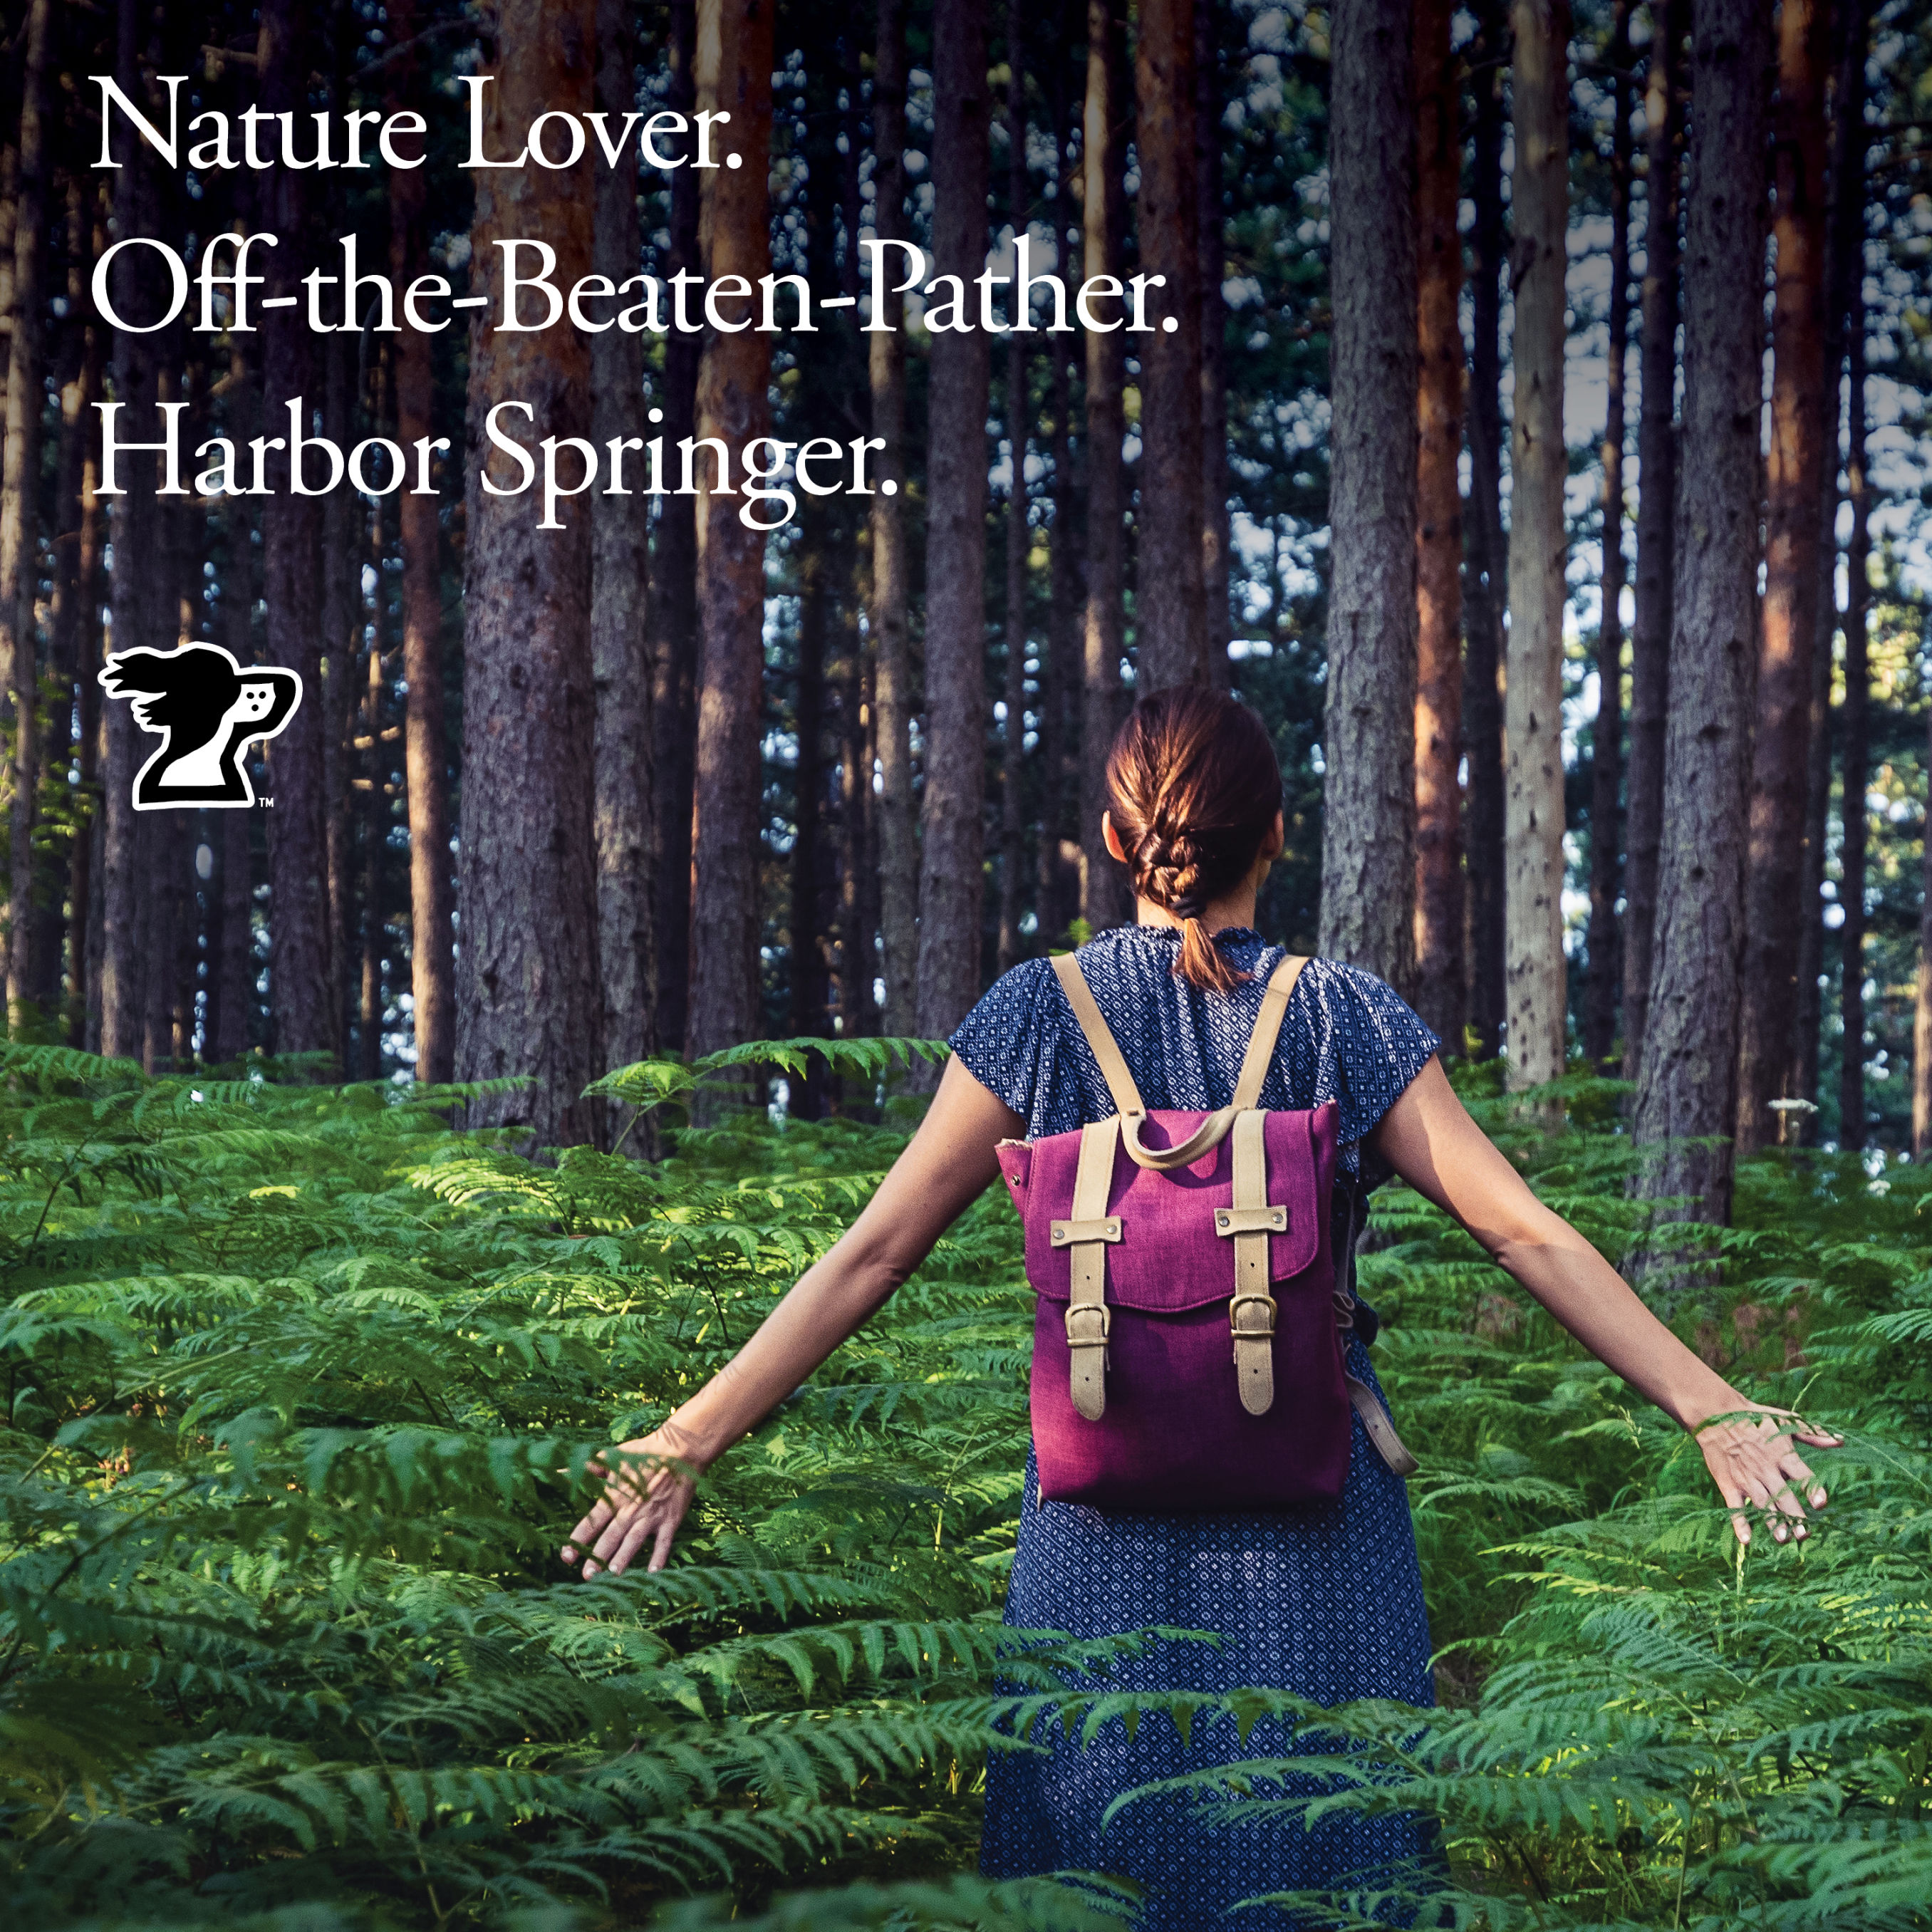 Picture of a woman hiking in the woods from Harbor Springer, a Harbor Springs, Michigan clothing store.